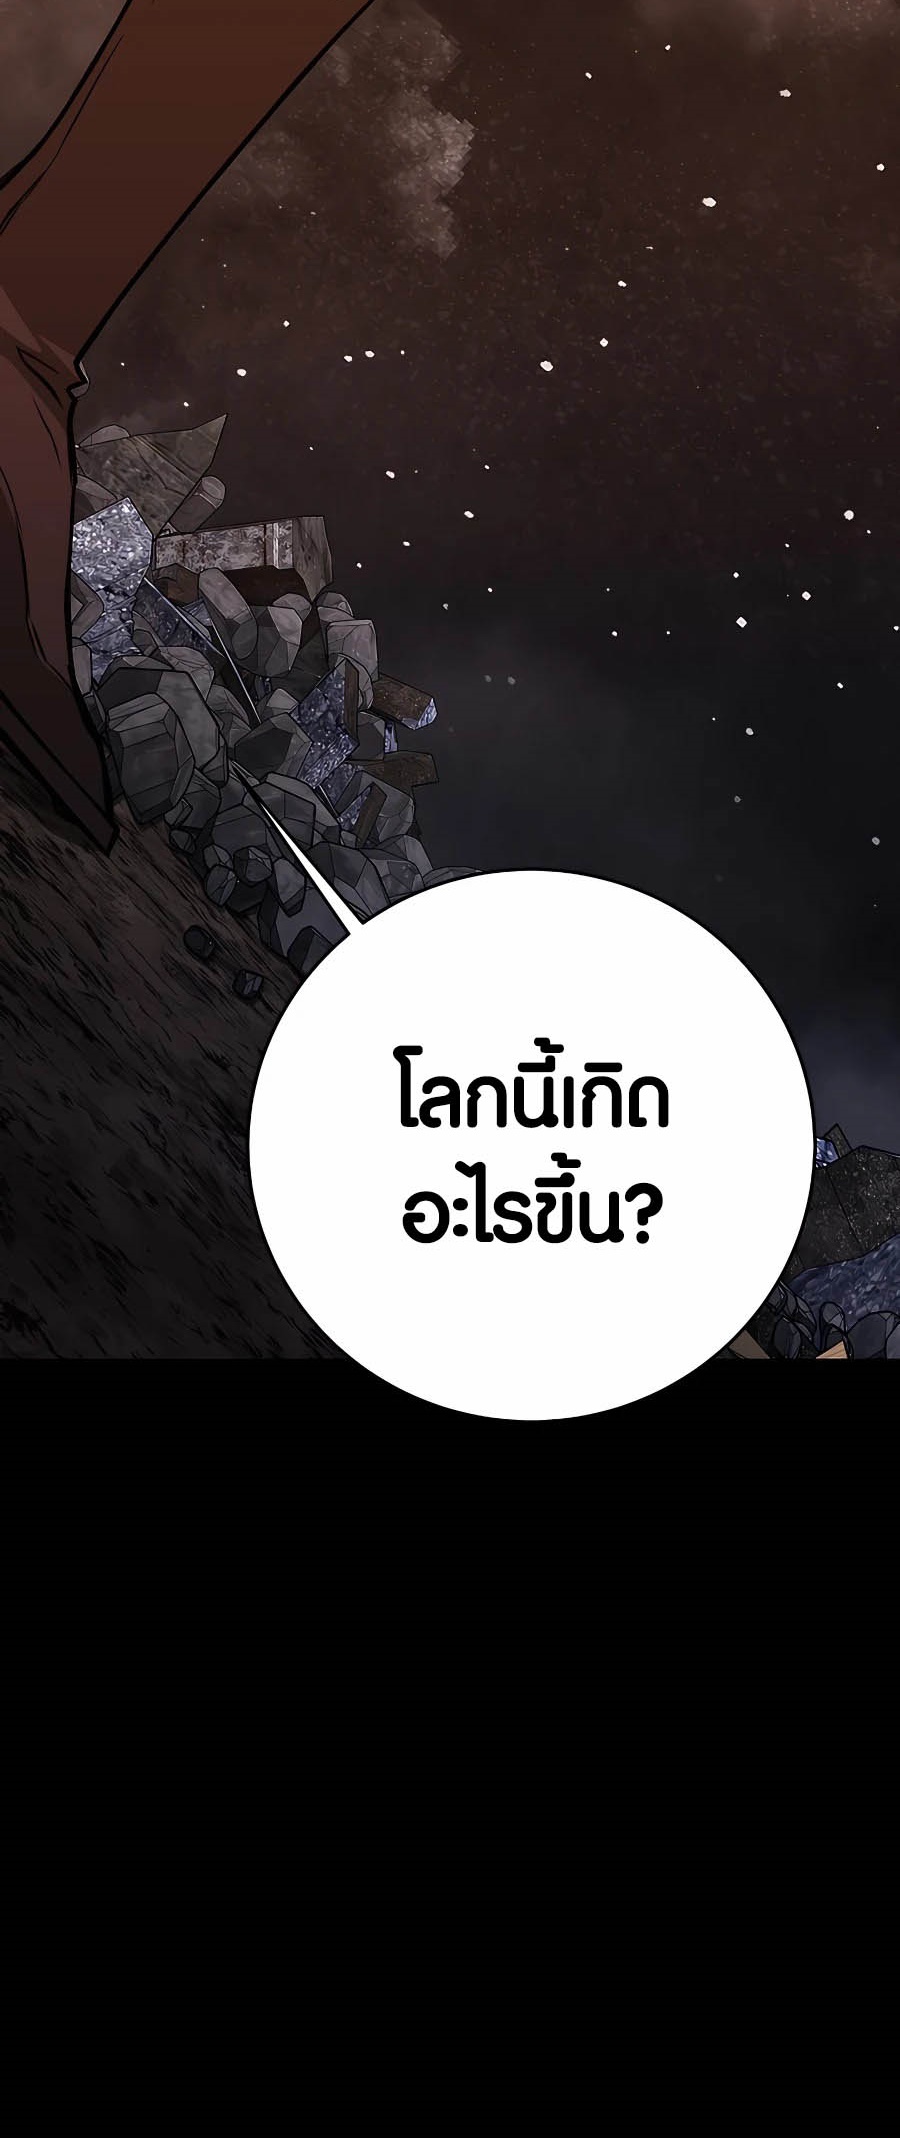 à¸­à¹ˆà¸²à¸™à¸¡à¸±à¸™à¸®à¸§à¸² à¹€à¸£à¸·à¹ˆà¸­à¸‡ The Part Time Land of the Gods 55 16